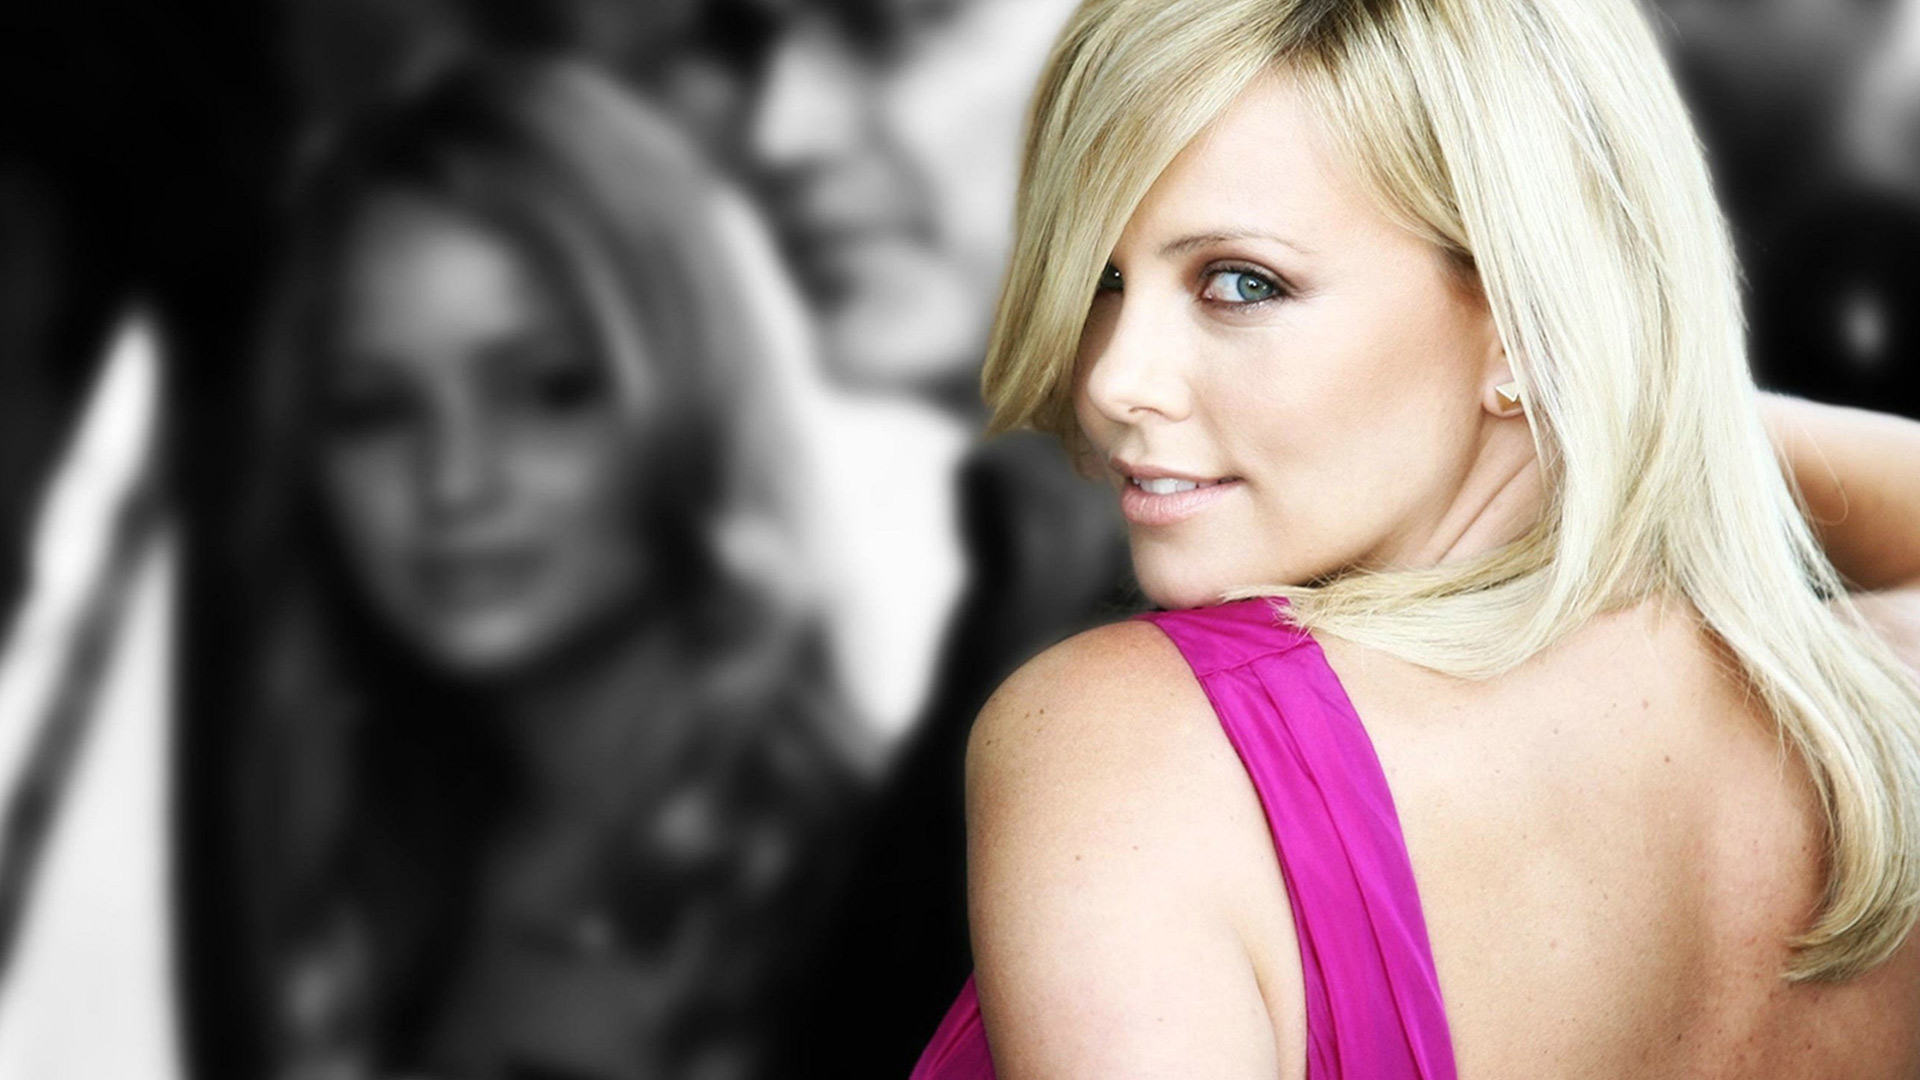 Photo 2of 5 | Charlize Theron Wallpapers | Charlize Theron New Wallpapers | Charlize Theron